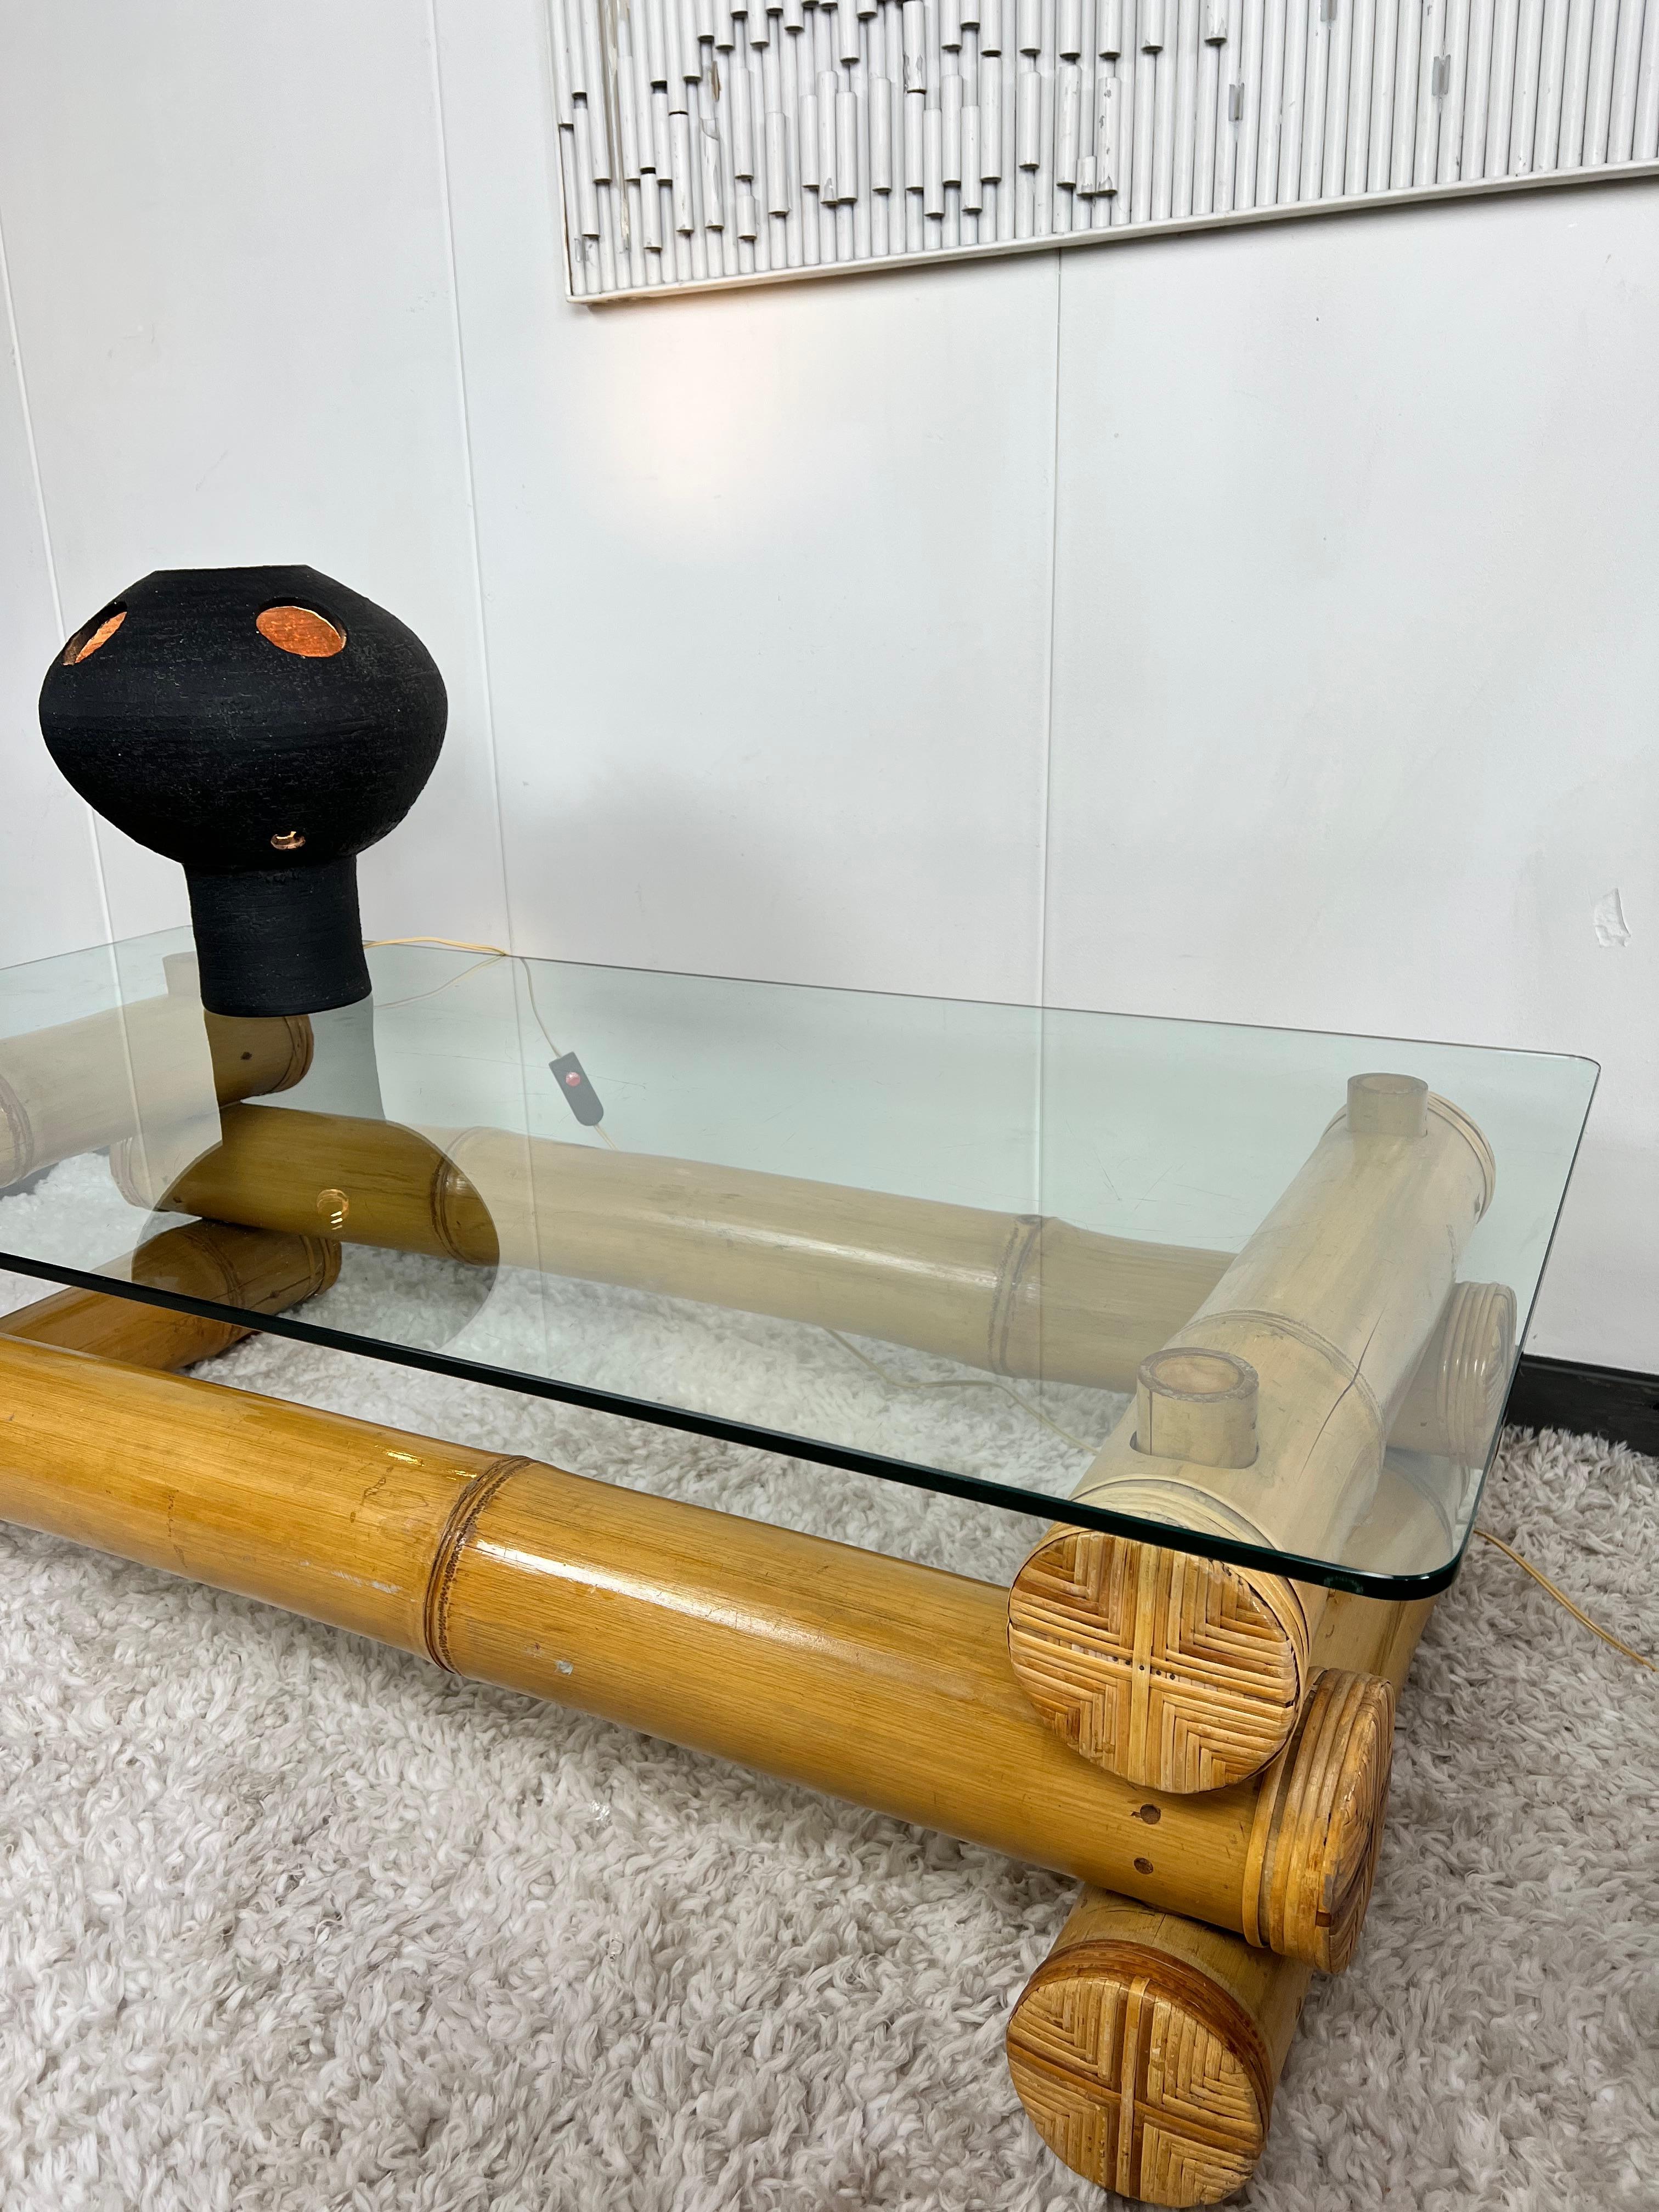 Highly unusual bamboo coffee table with glass top. The base is formed by stacked bamboo stems, each about 15cm thick! No nails or screws were used, just wooden pins. The thick clear glass top rests on the bamboo and has rounded corners.
 
Hard to